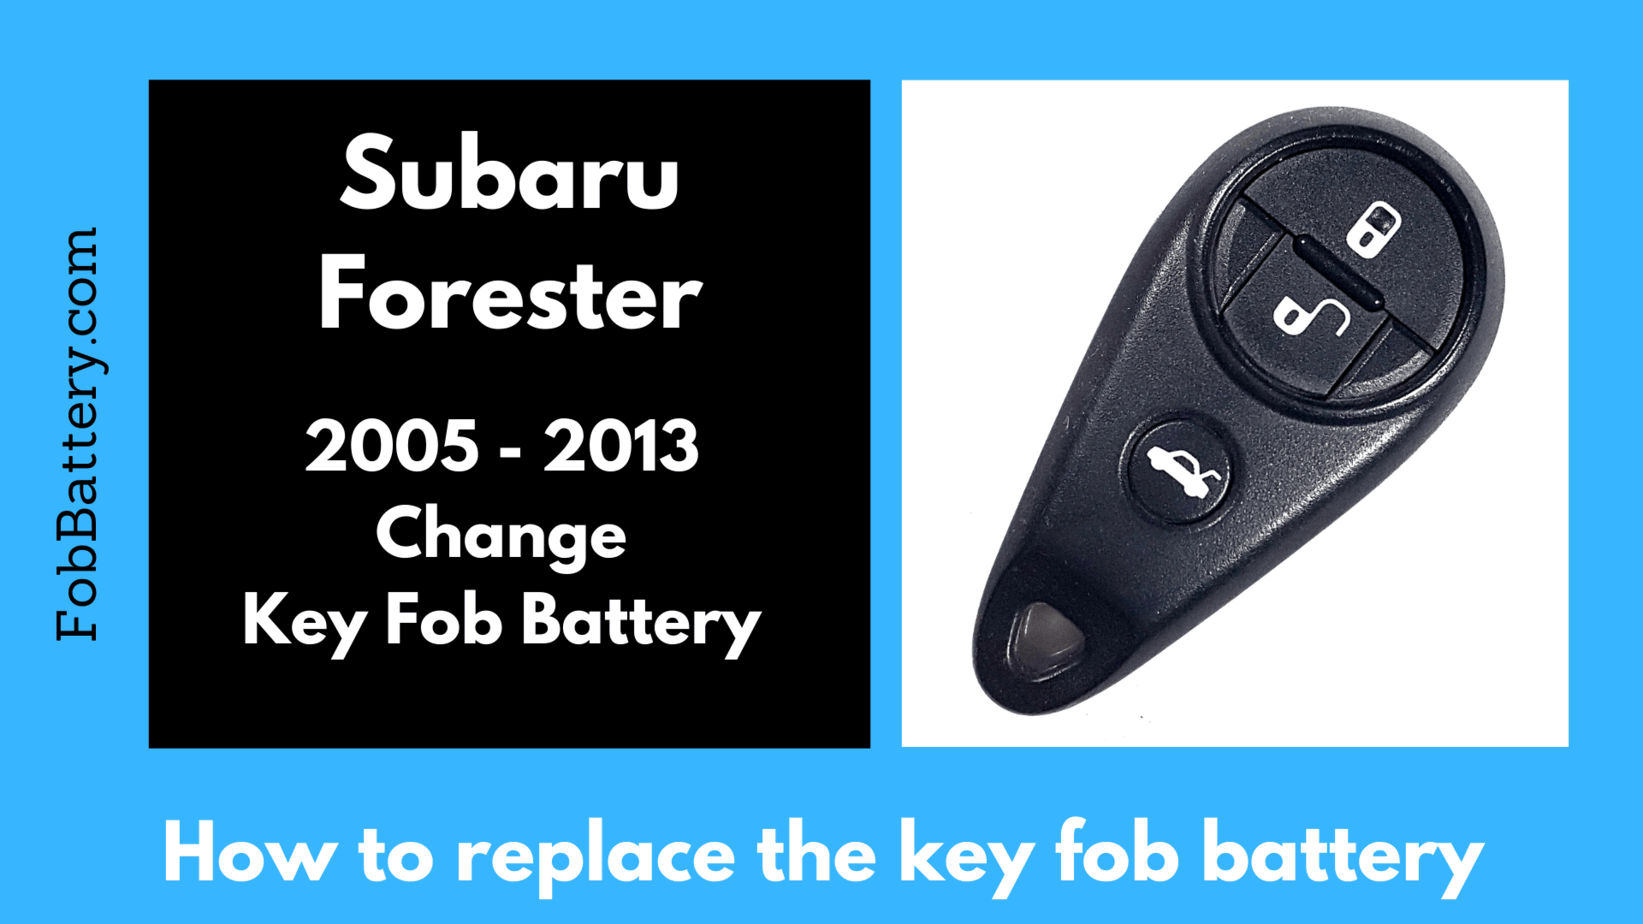 Subaru Forster key fob battery replacement